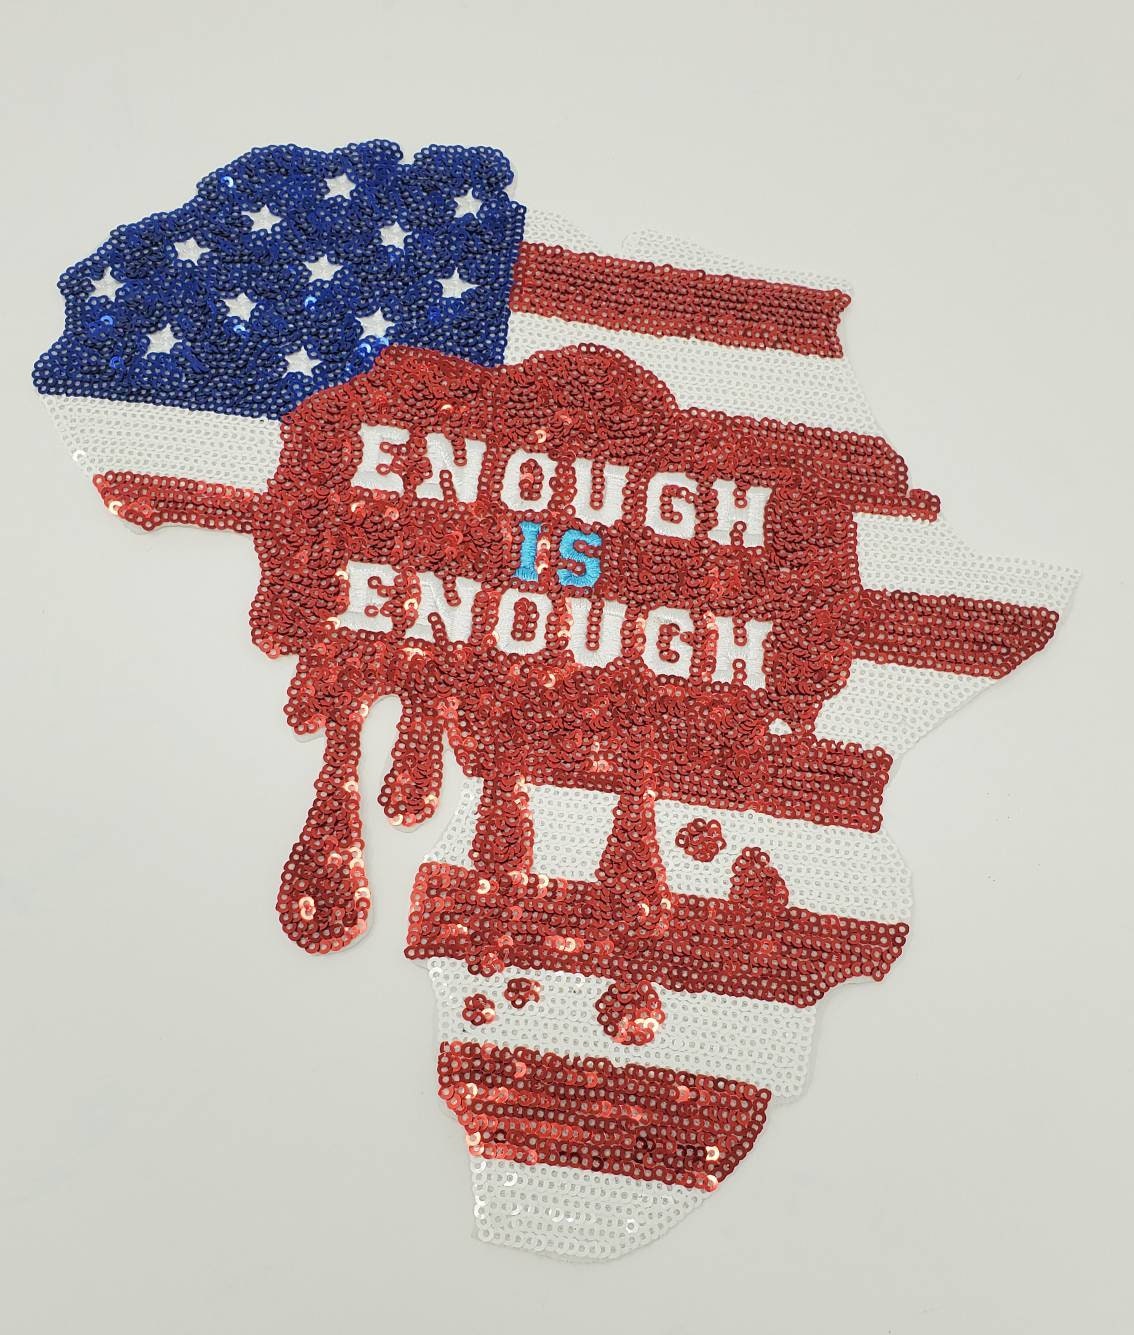 Exclusive SEQUINS, Enough is Enough Blood Shed